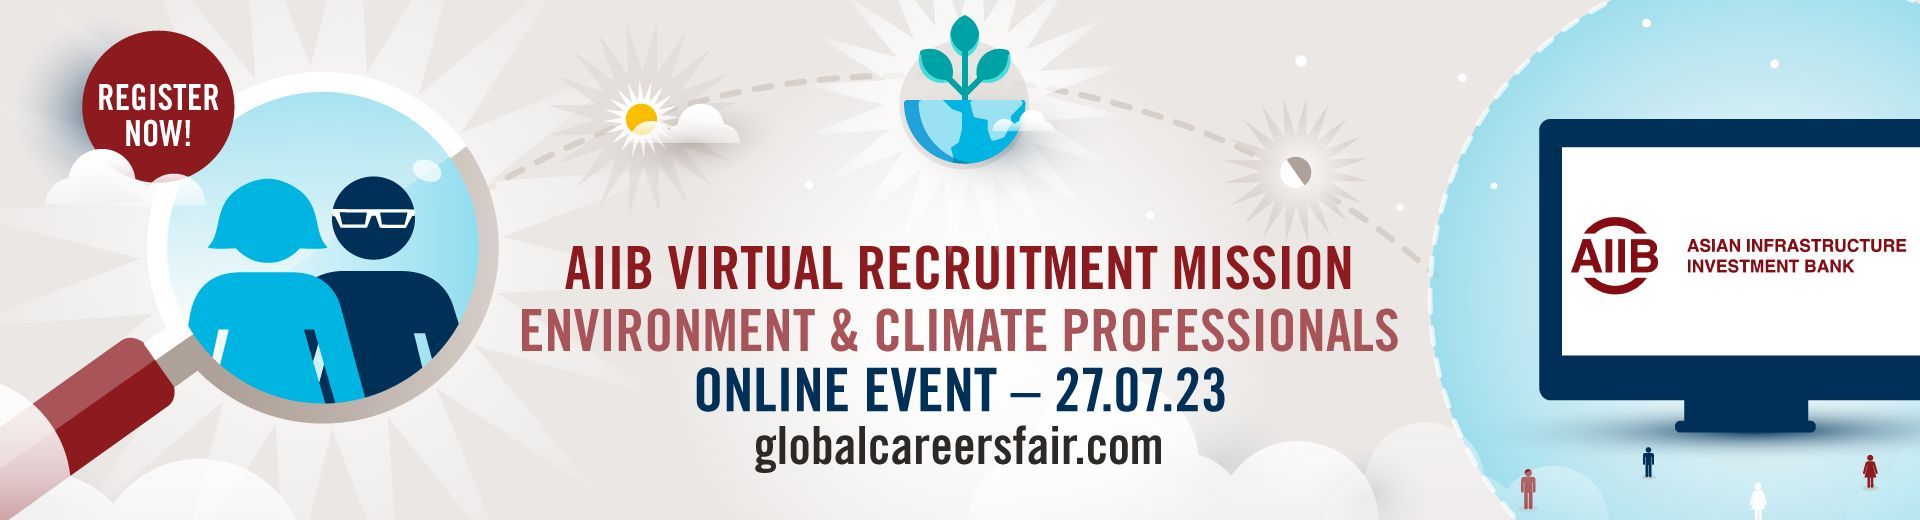 AIIB Career Opportunities  for Environment, Social Development, and Climate Change Professionals